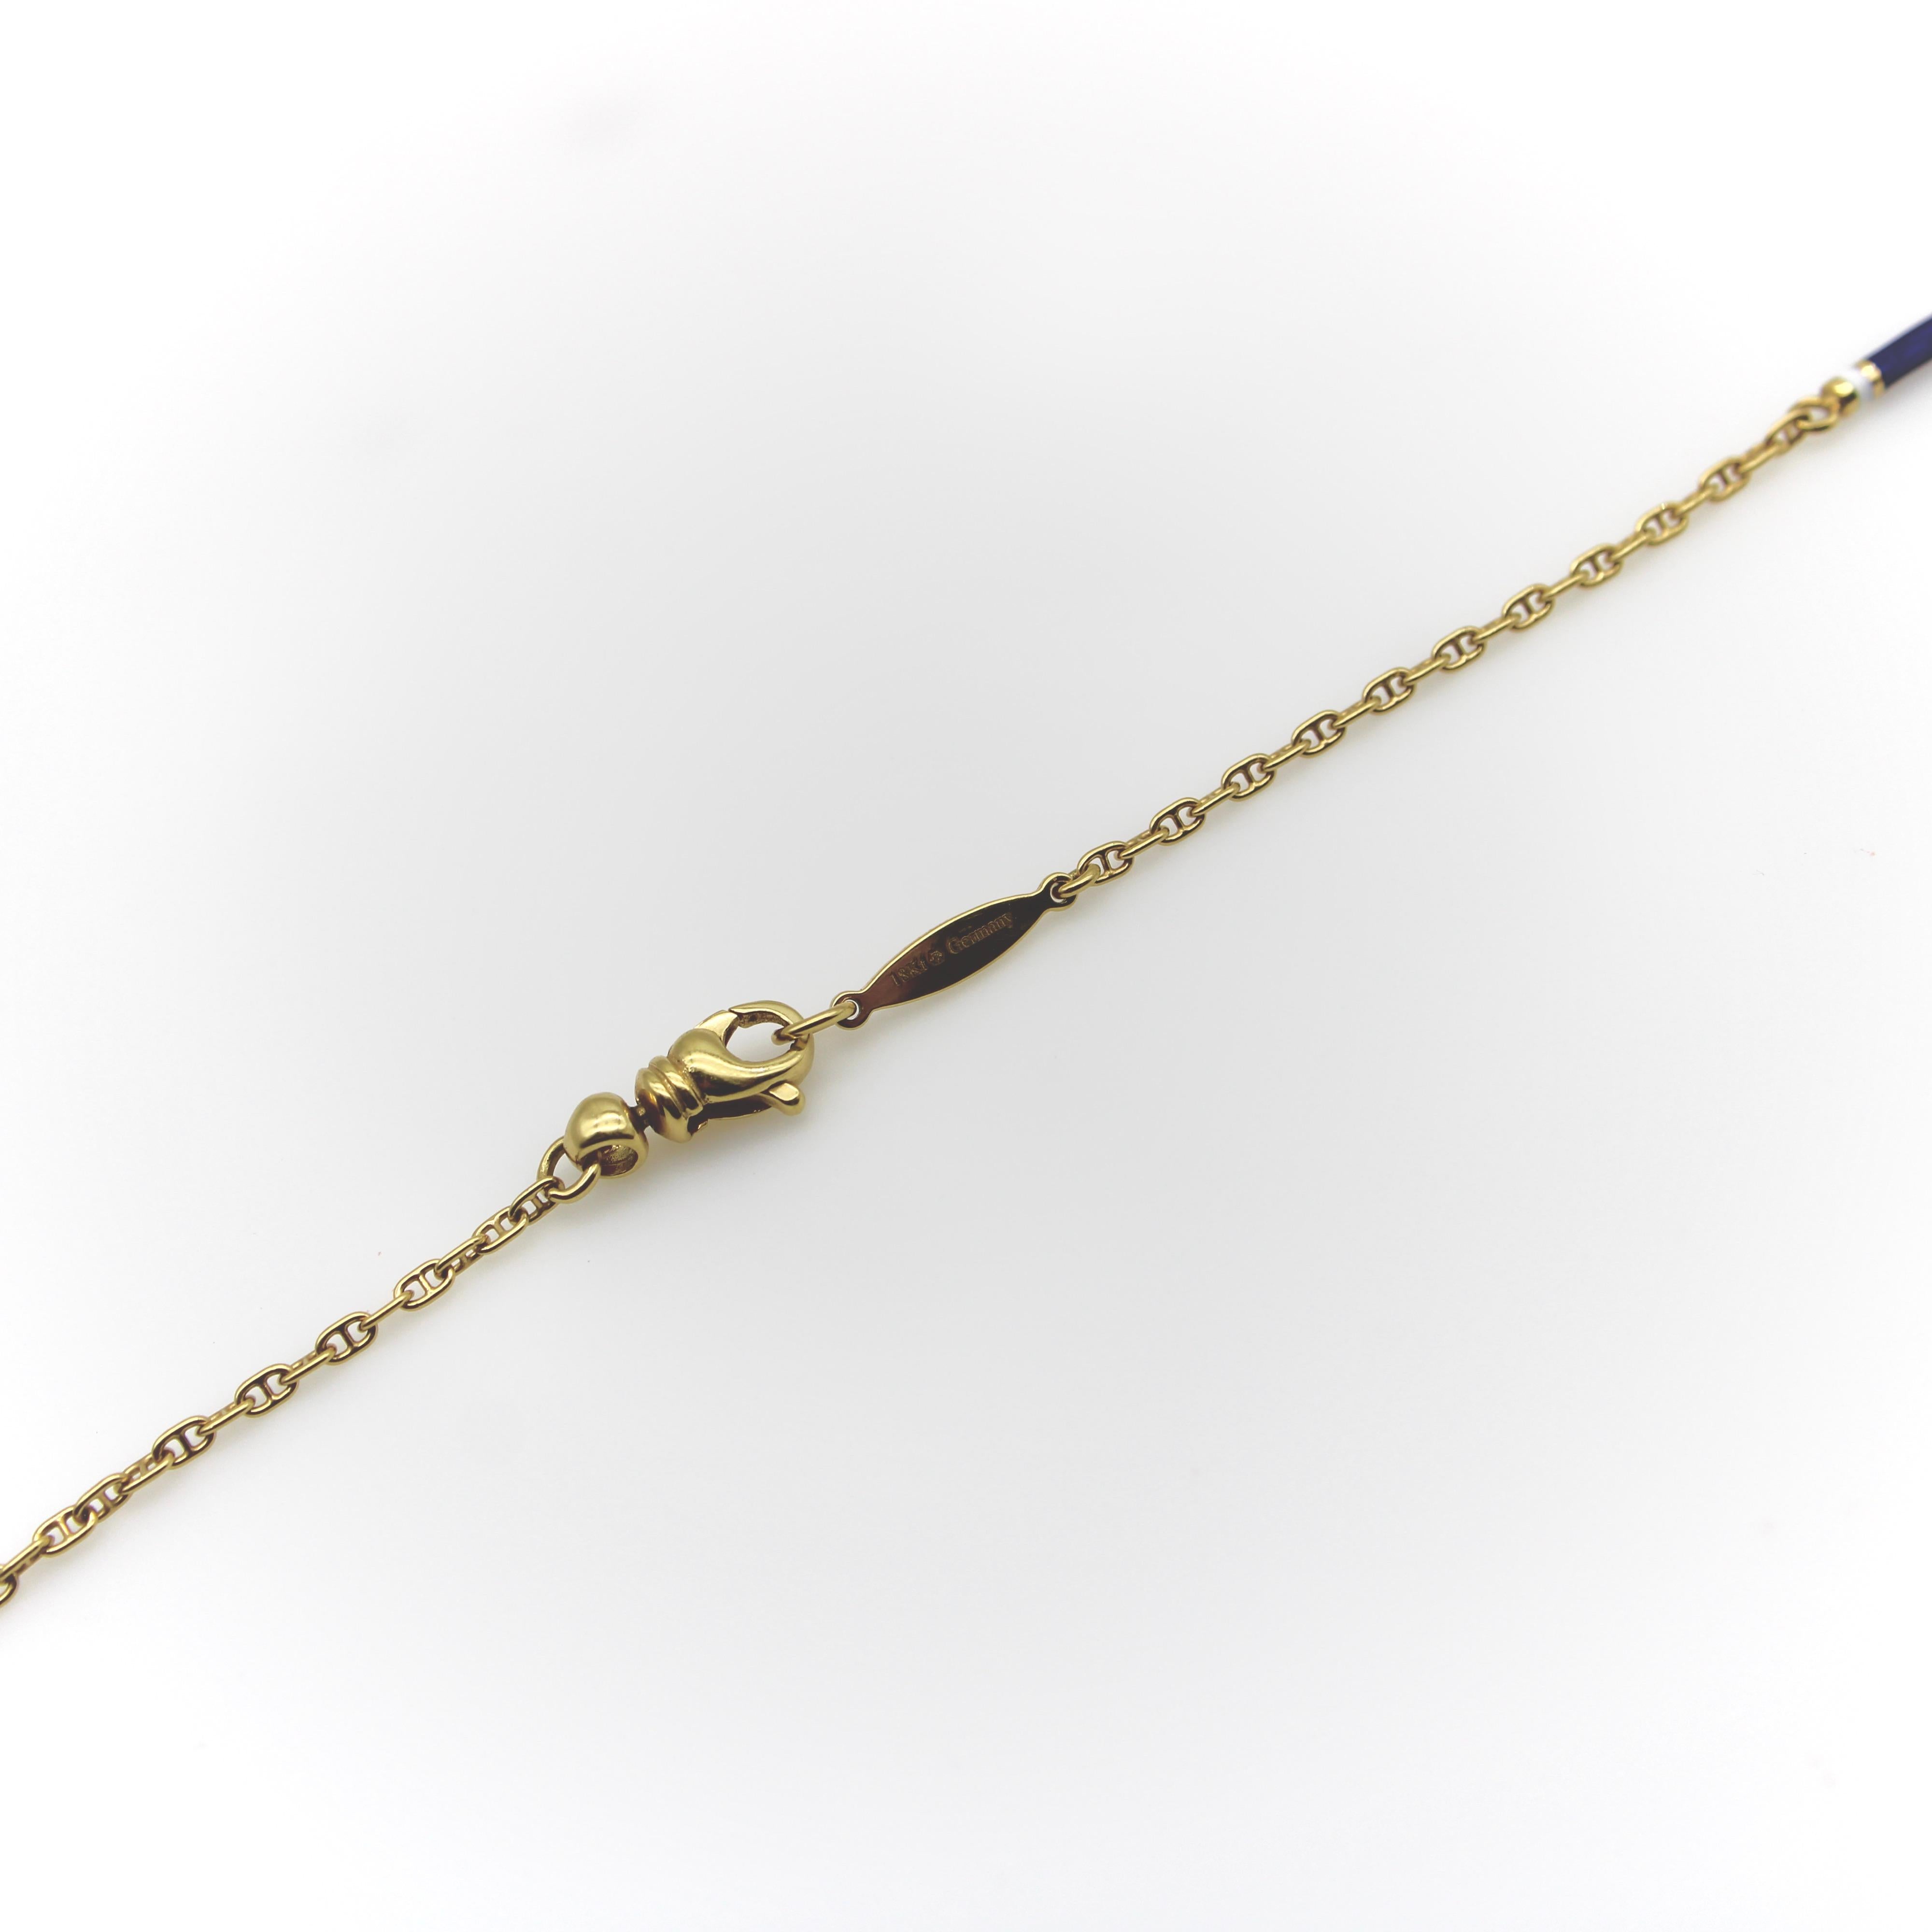 Fabergé 18K Gold Mariners Link Chain with Guilloché Enamel Stations  3